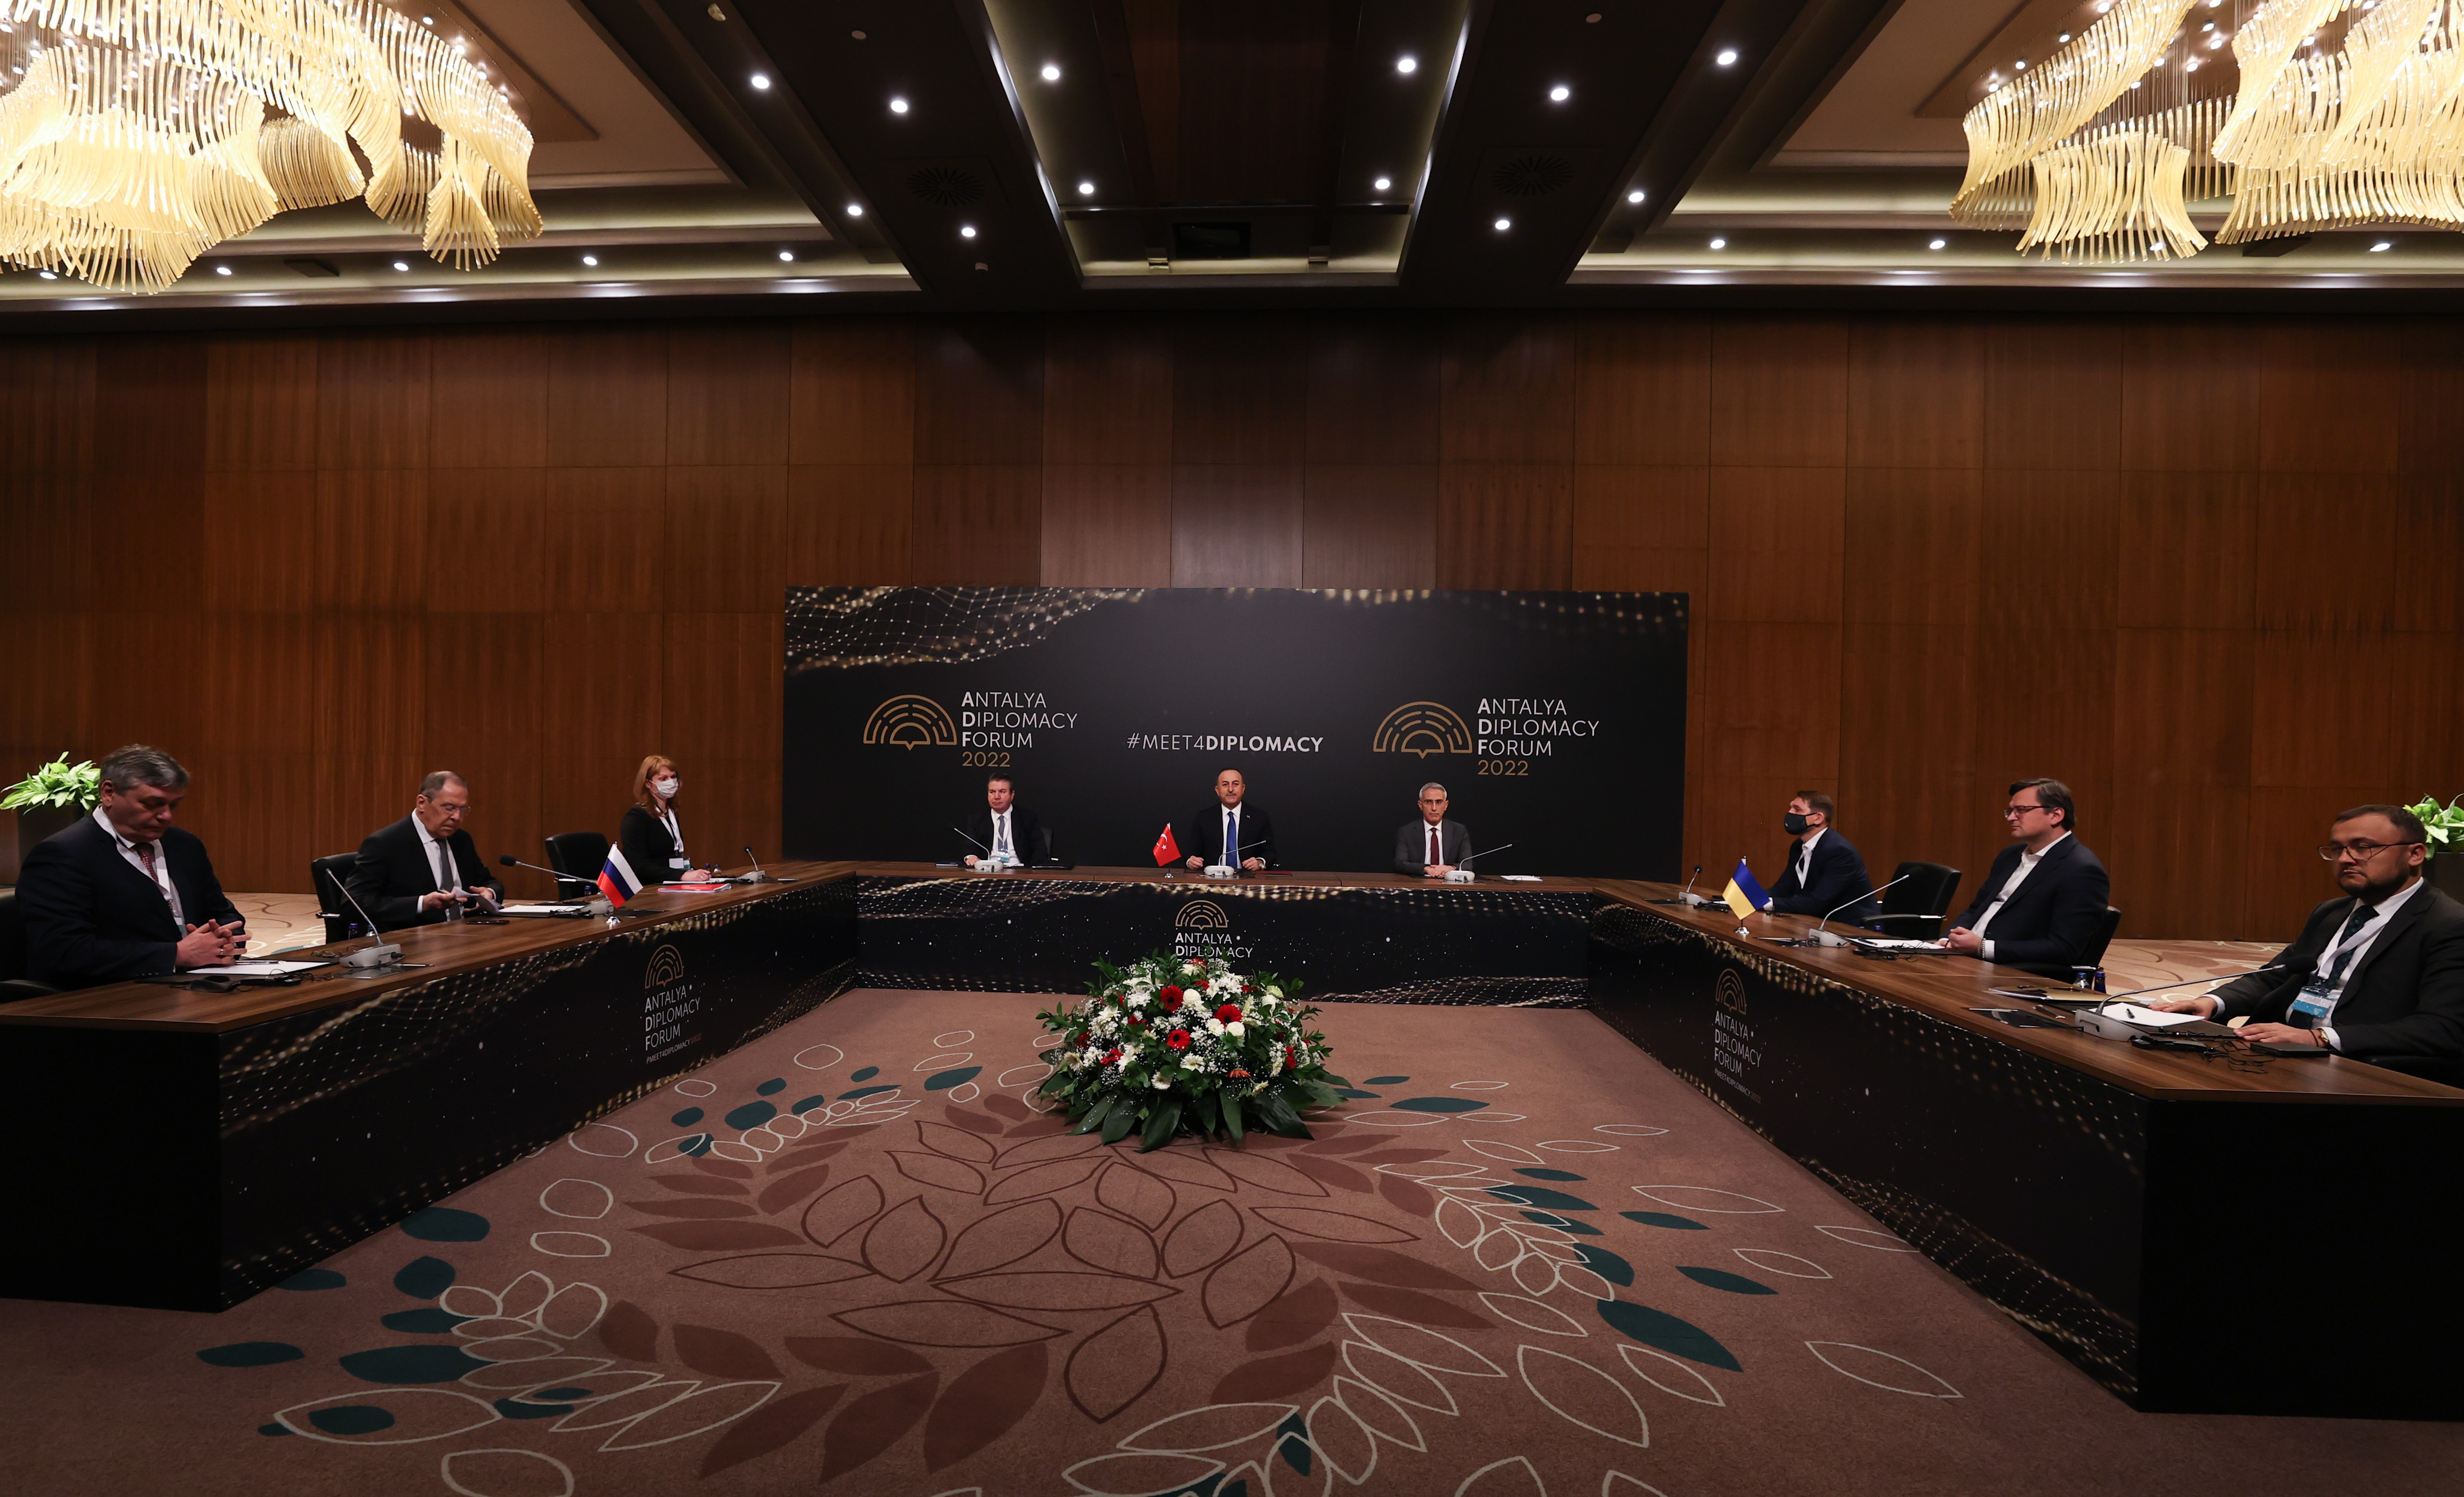 Russian Foreign Minister Sergey Lavrov and Ukraine's Foreign Minister Dmytro Kuleba attend a tripartite meeting hosted by Turkish Foreign Minister Mevlut Cavusoglu at the Antalya Diplomacy Forum in Antalya, Turkey, on March 10.